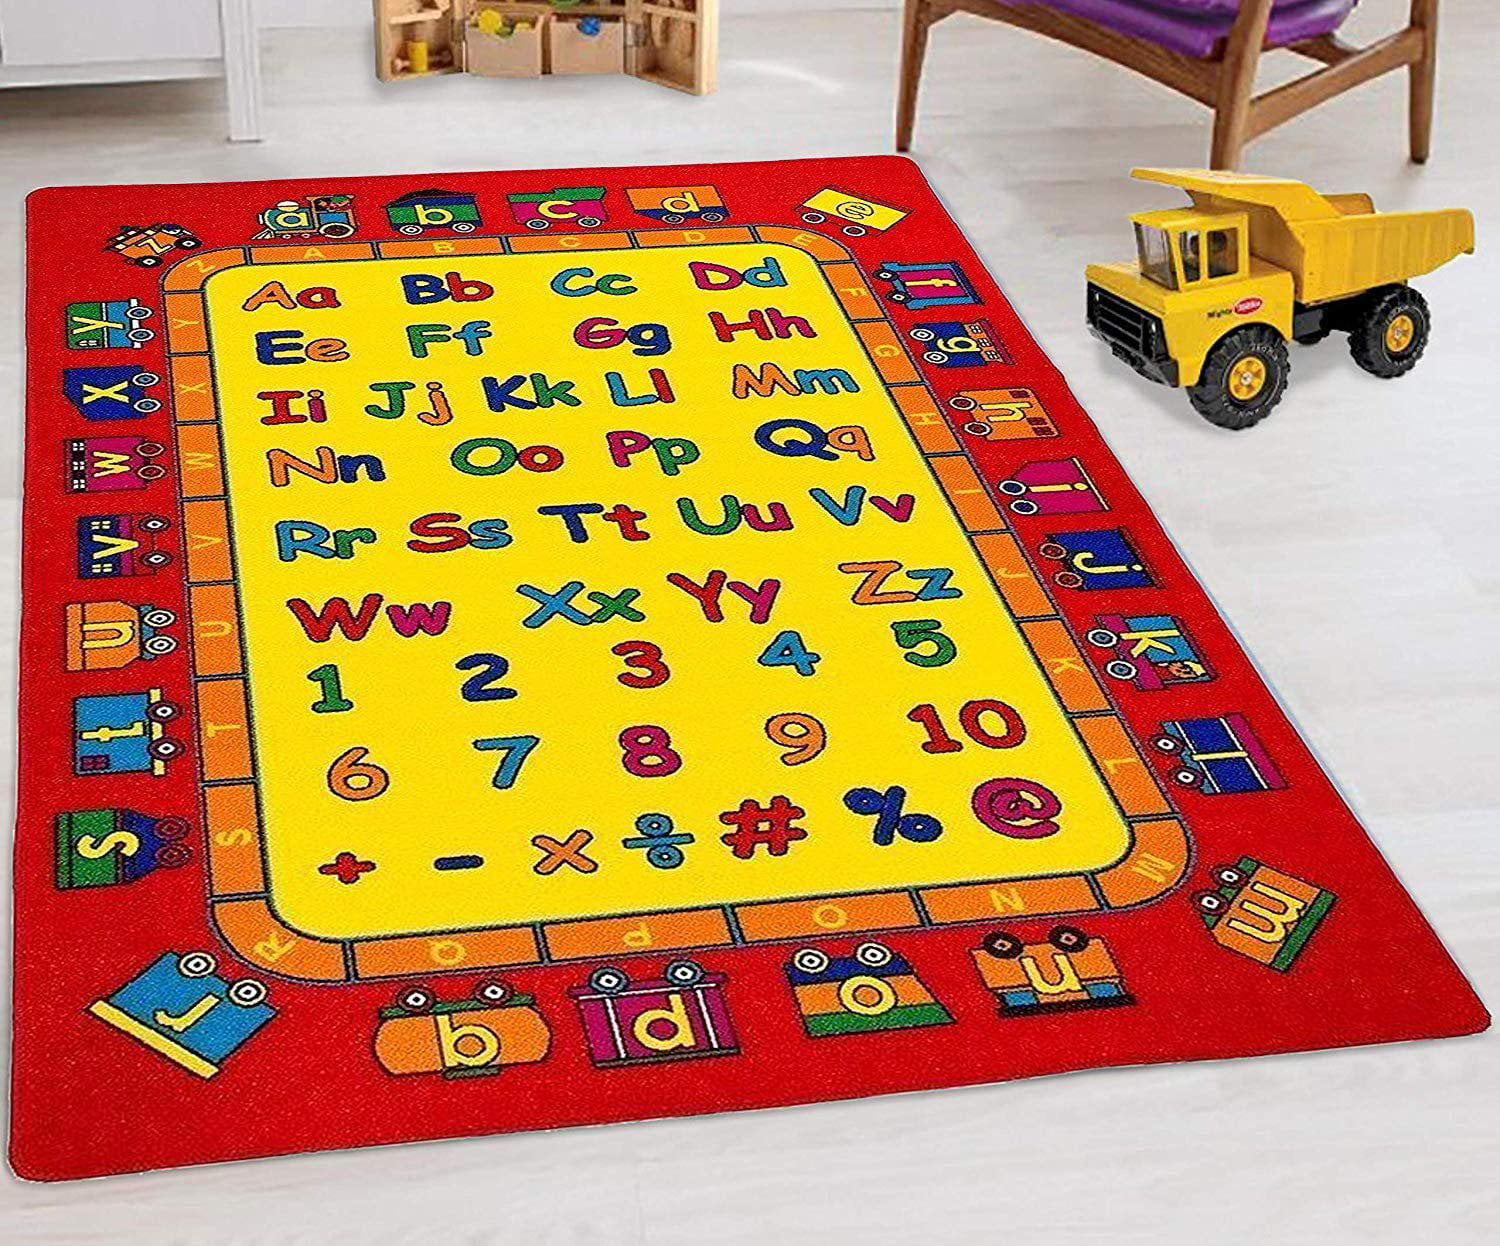 ALPHABET FOODS CHAMPION RUGS 8FTX8FT ROUND PLAYTIME FUN EDUCATIONAL NON-SLIP/GEL BACK AREA RUG CARPET MULTI COLOR